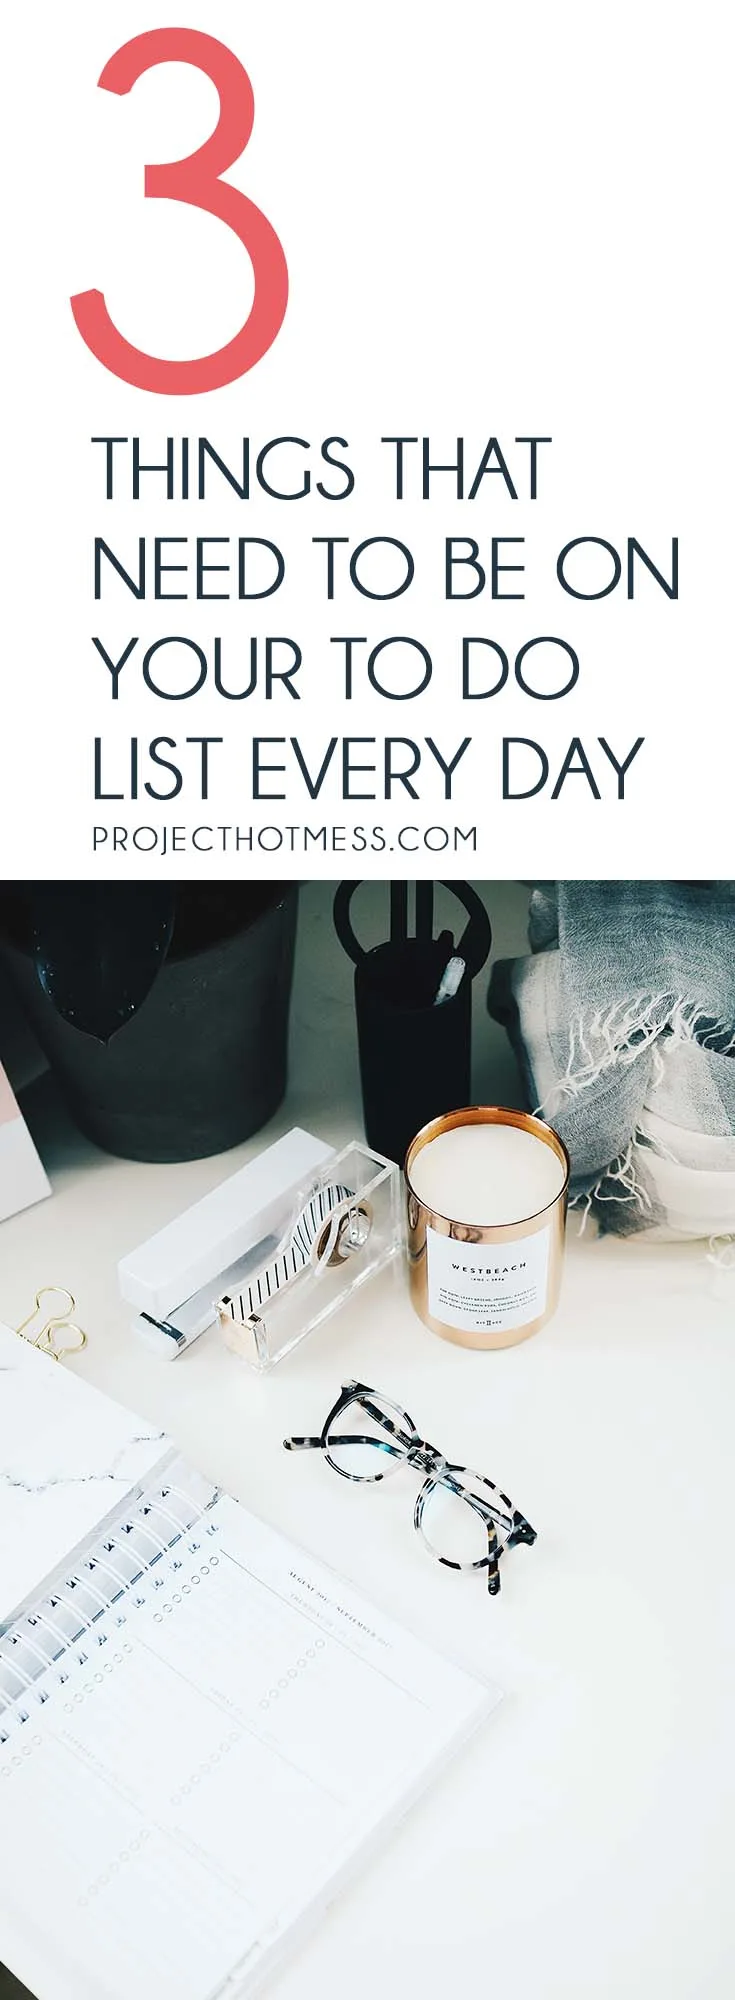 Stop overcomplicating your to do list and keep things simple! Focus on these 3 things that need to be on your to do list every day and feel good about it. To Do List | Productivity | 